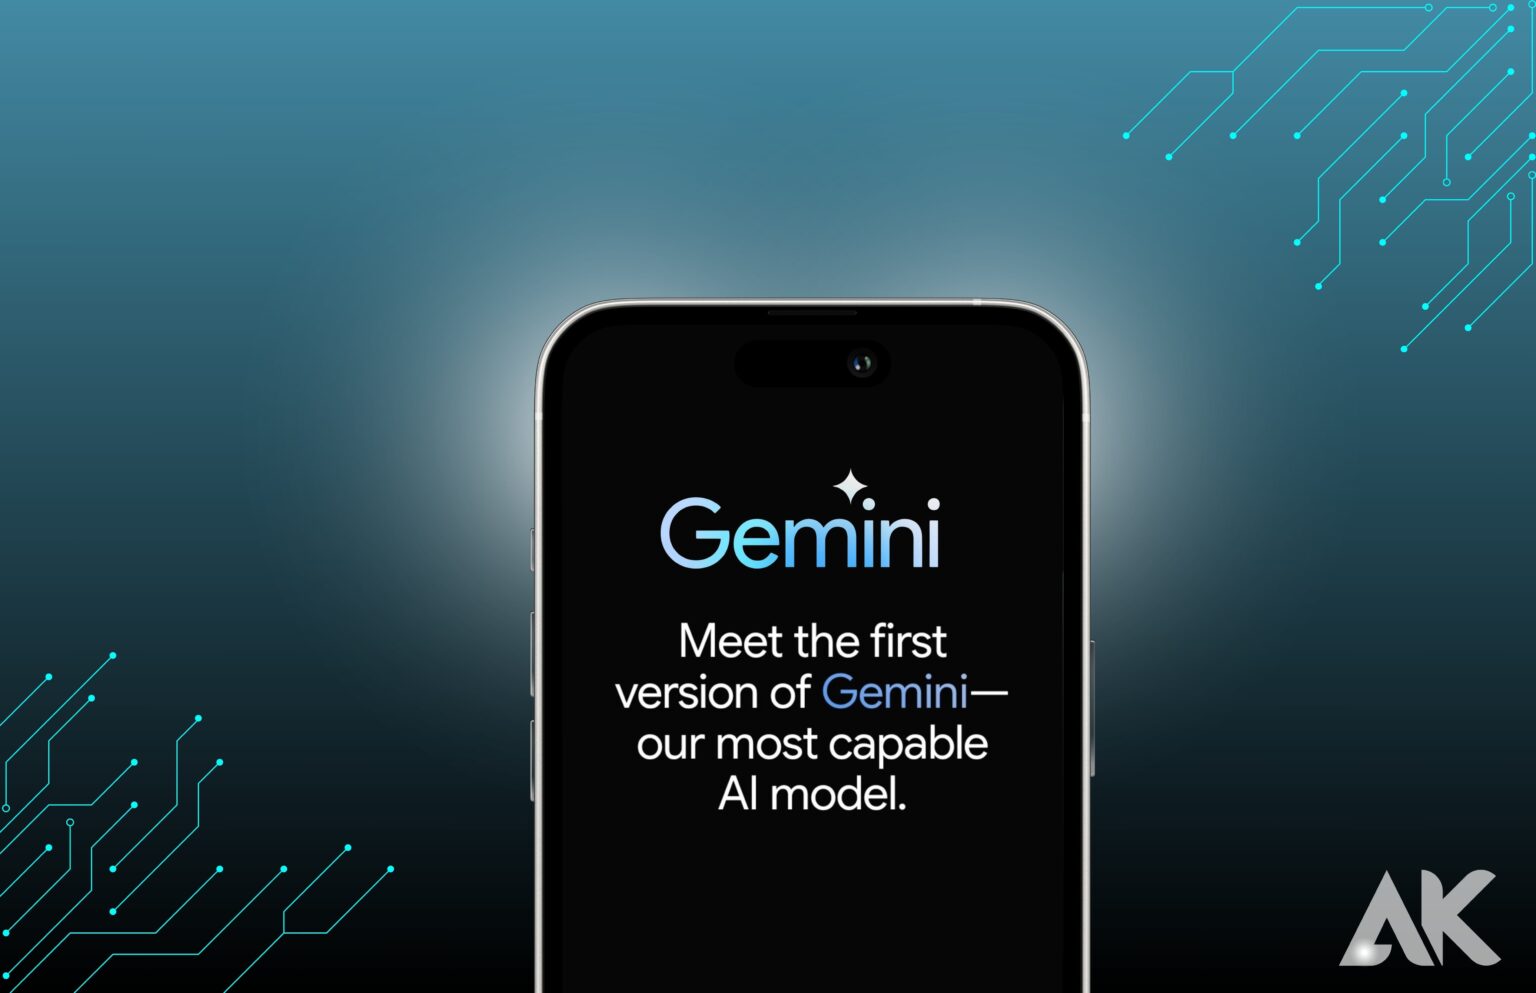 Open Access or Exclusive Club? Demystifying Who can use Gemini?